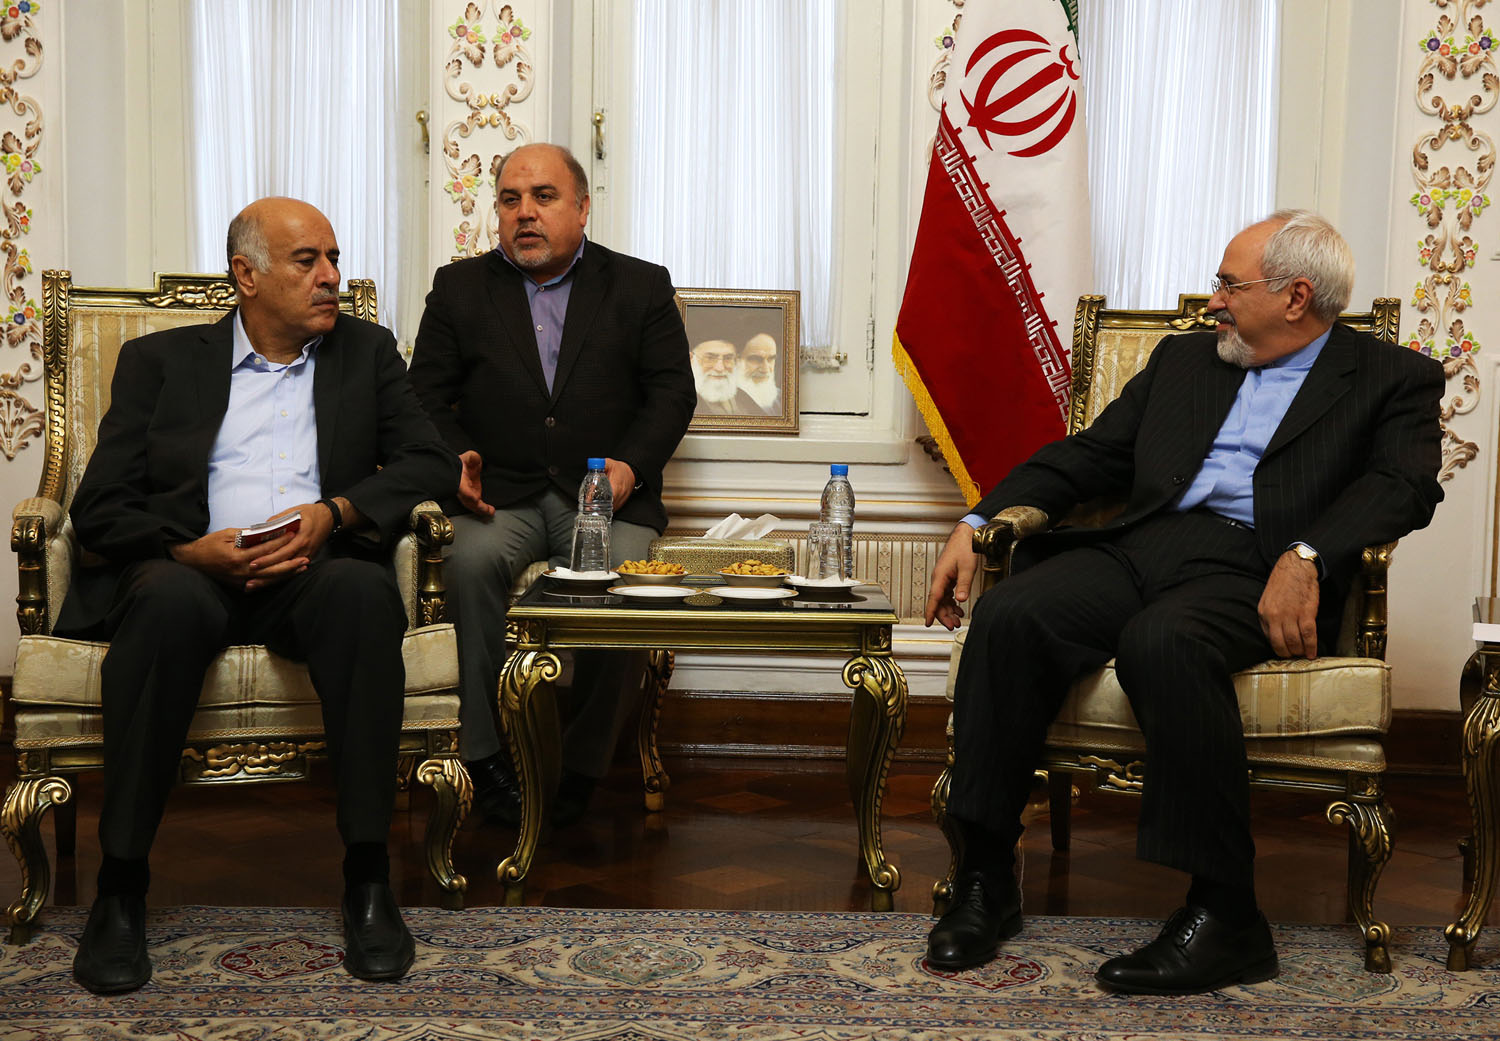 Jibril Rajoub, a senior official in the Palestinian Authority, left, meets with Iranian Foreign Minister Mohammad Javad Zarif in Tehran on Jan. 28, 2014 (Azin Haghighi—AFP/Getty Images)